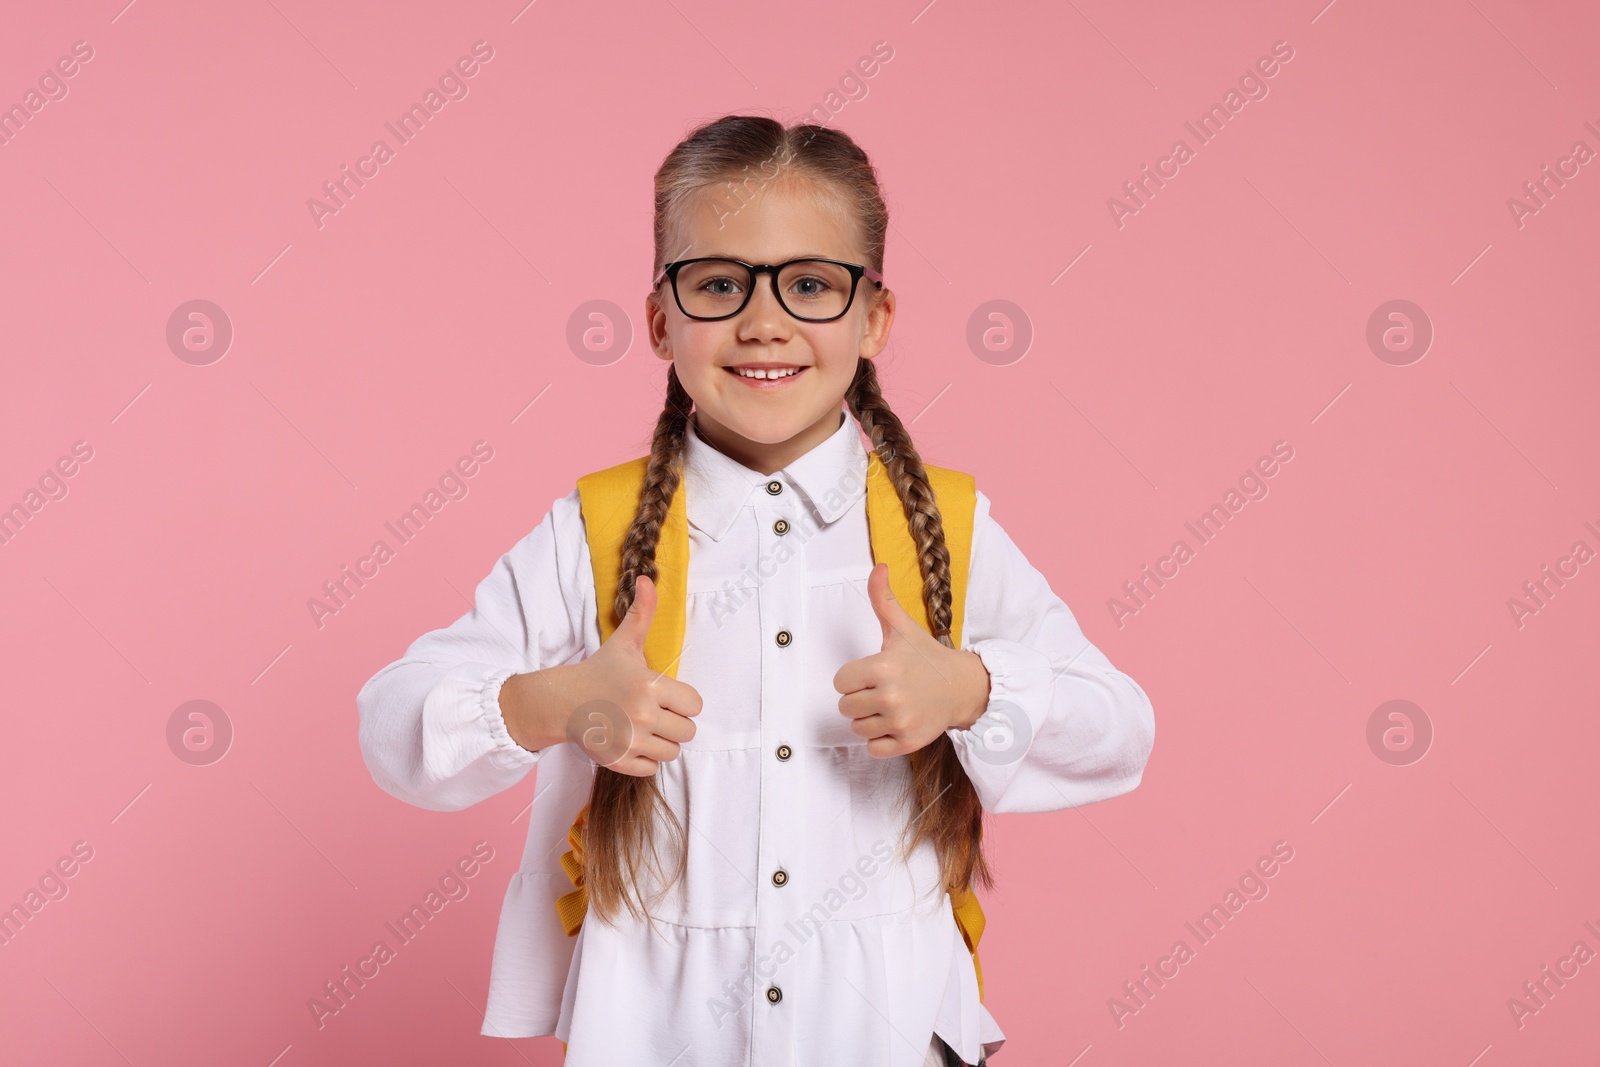 Photo of Happy schoolgirl with backpack showing thumbs up gesture on pink background